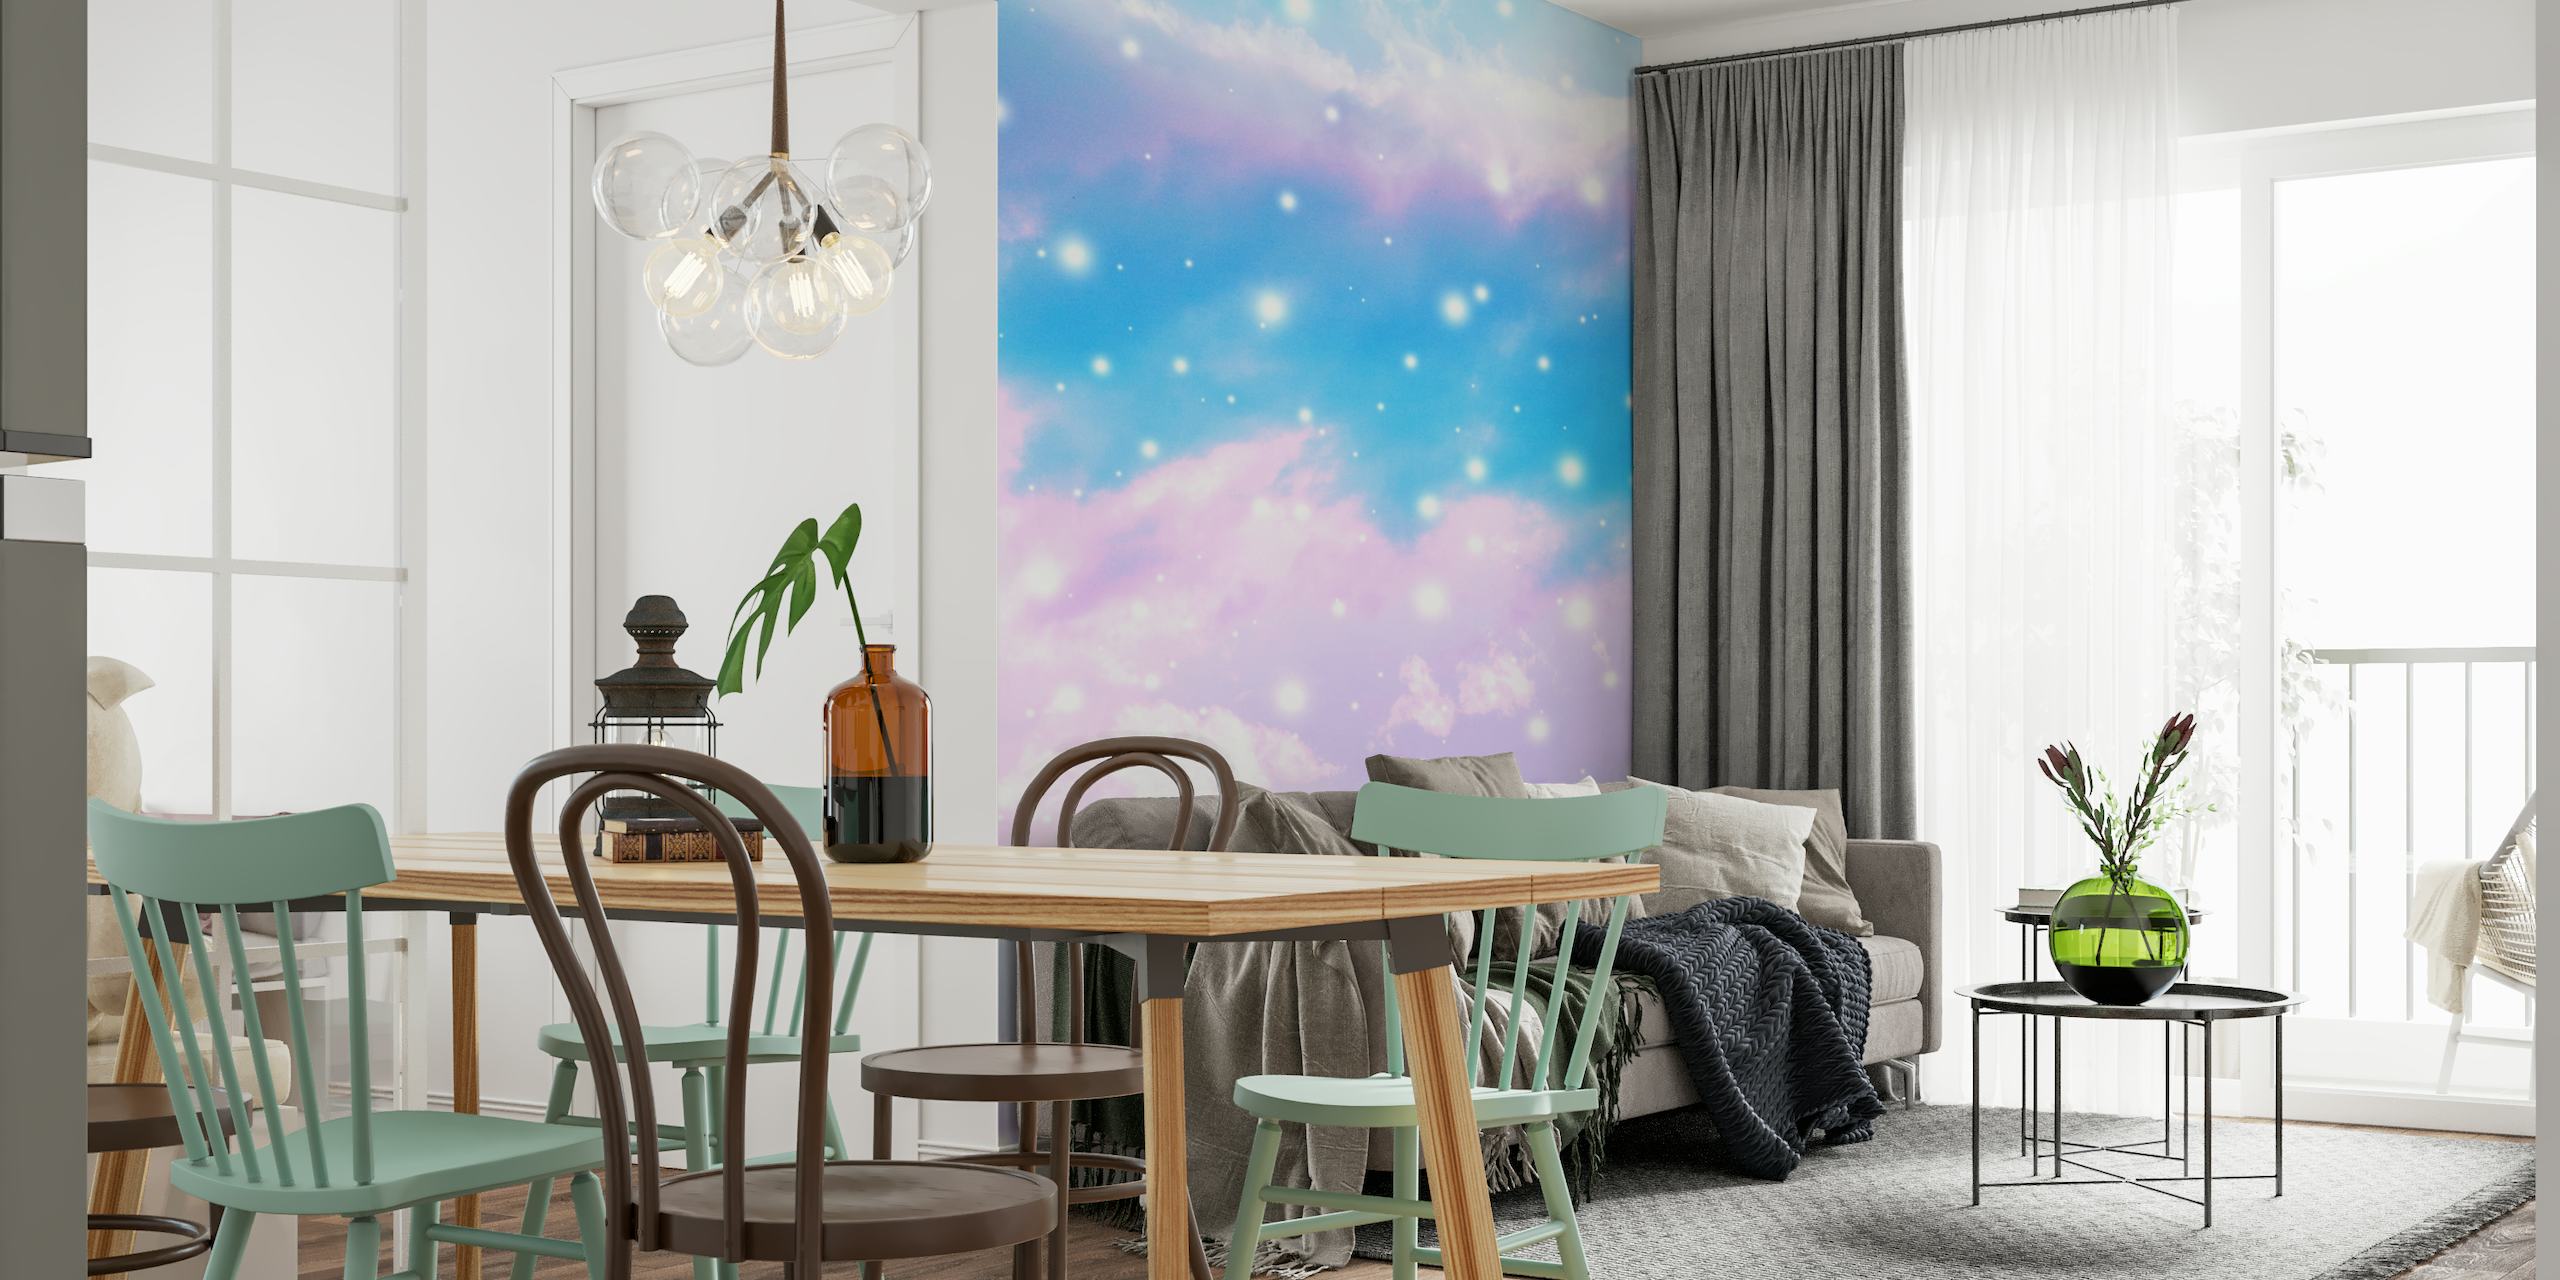 Pastel-colored celestial wall mural with stars